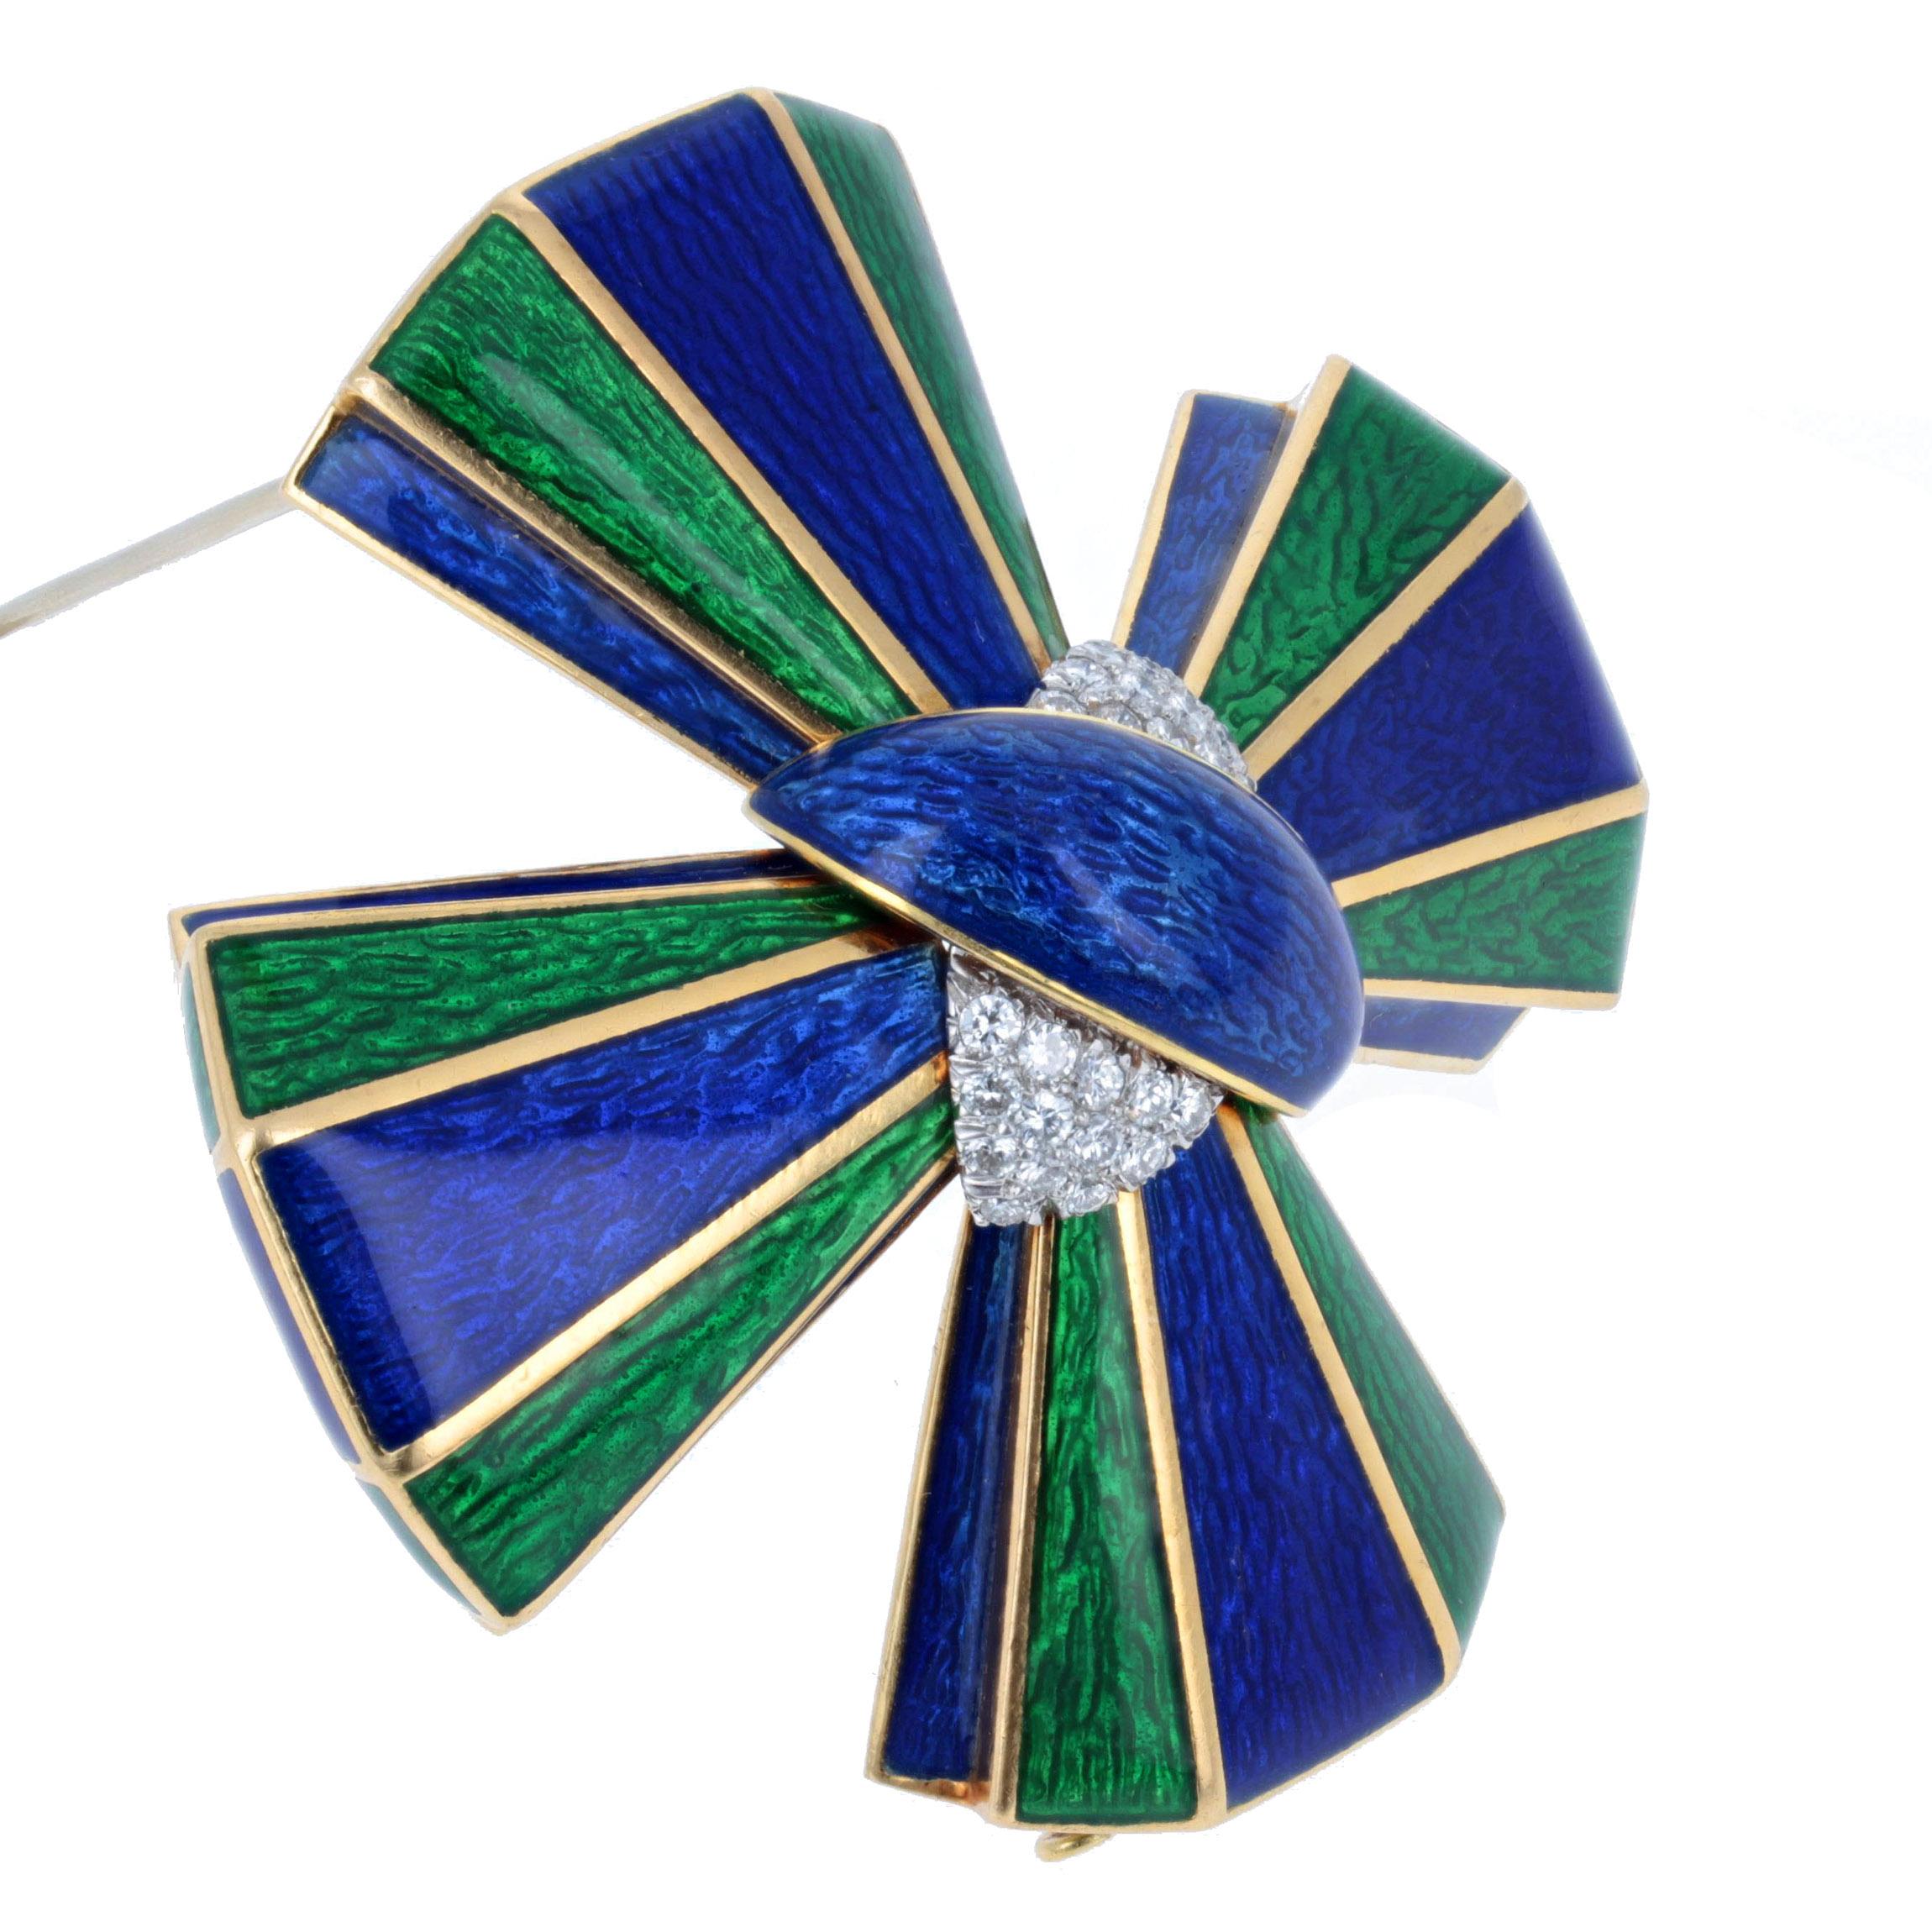 This bold brooch is designed as a Maltese cross with a vivid and translucent combination of emerald green and royal blue enamel alternating throughout and centering upon a knot of the same blue enamel and pave set diamonds that weigh approximately